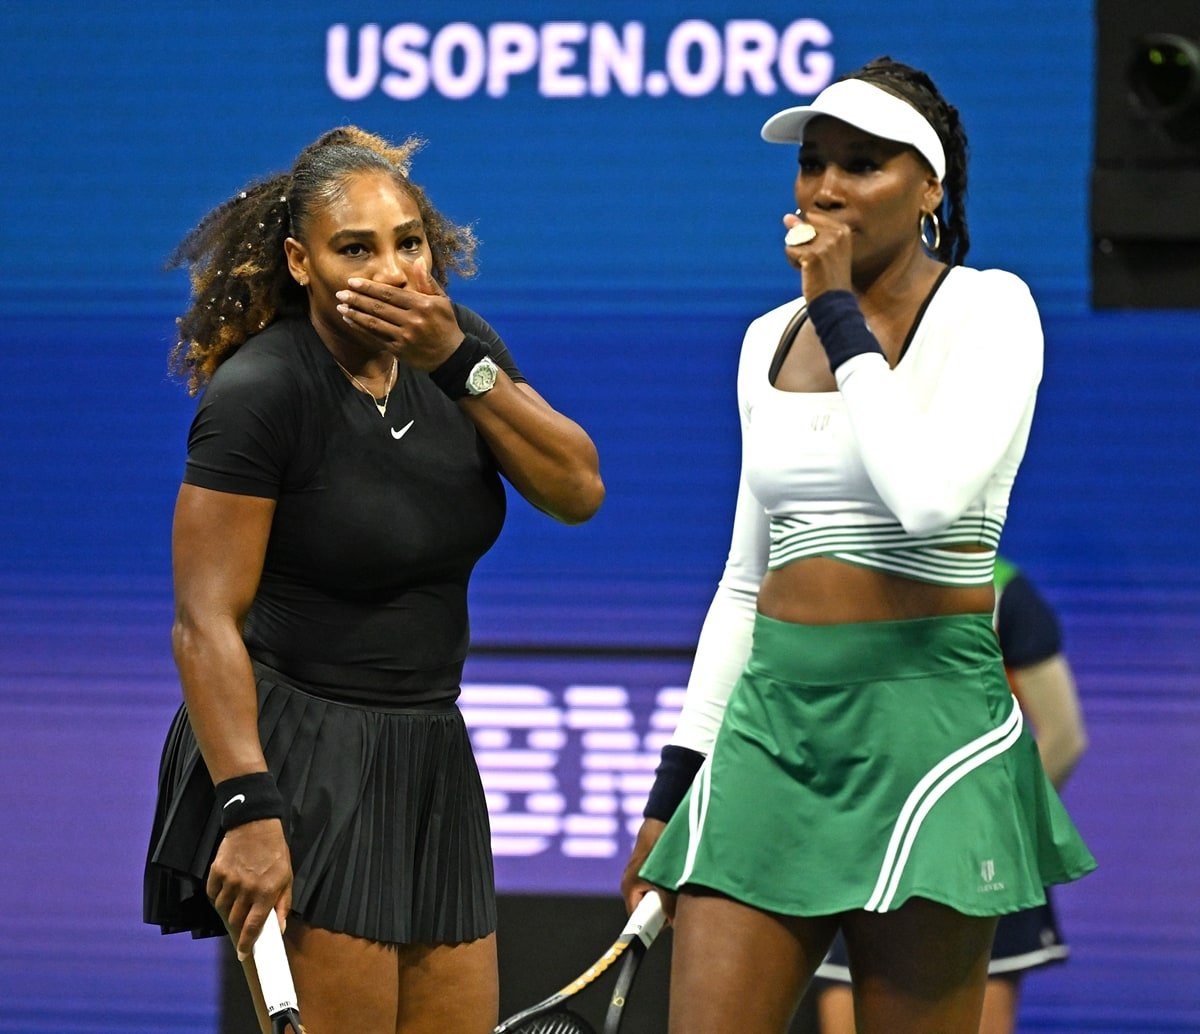 Serena Williams is 5 feet 9 inches (175.3 cm) tall, while her sister Venus Williams is significantly taller at 6 feet ½ inch (184.2 cm)